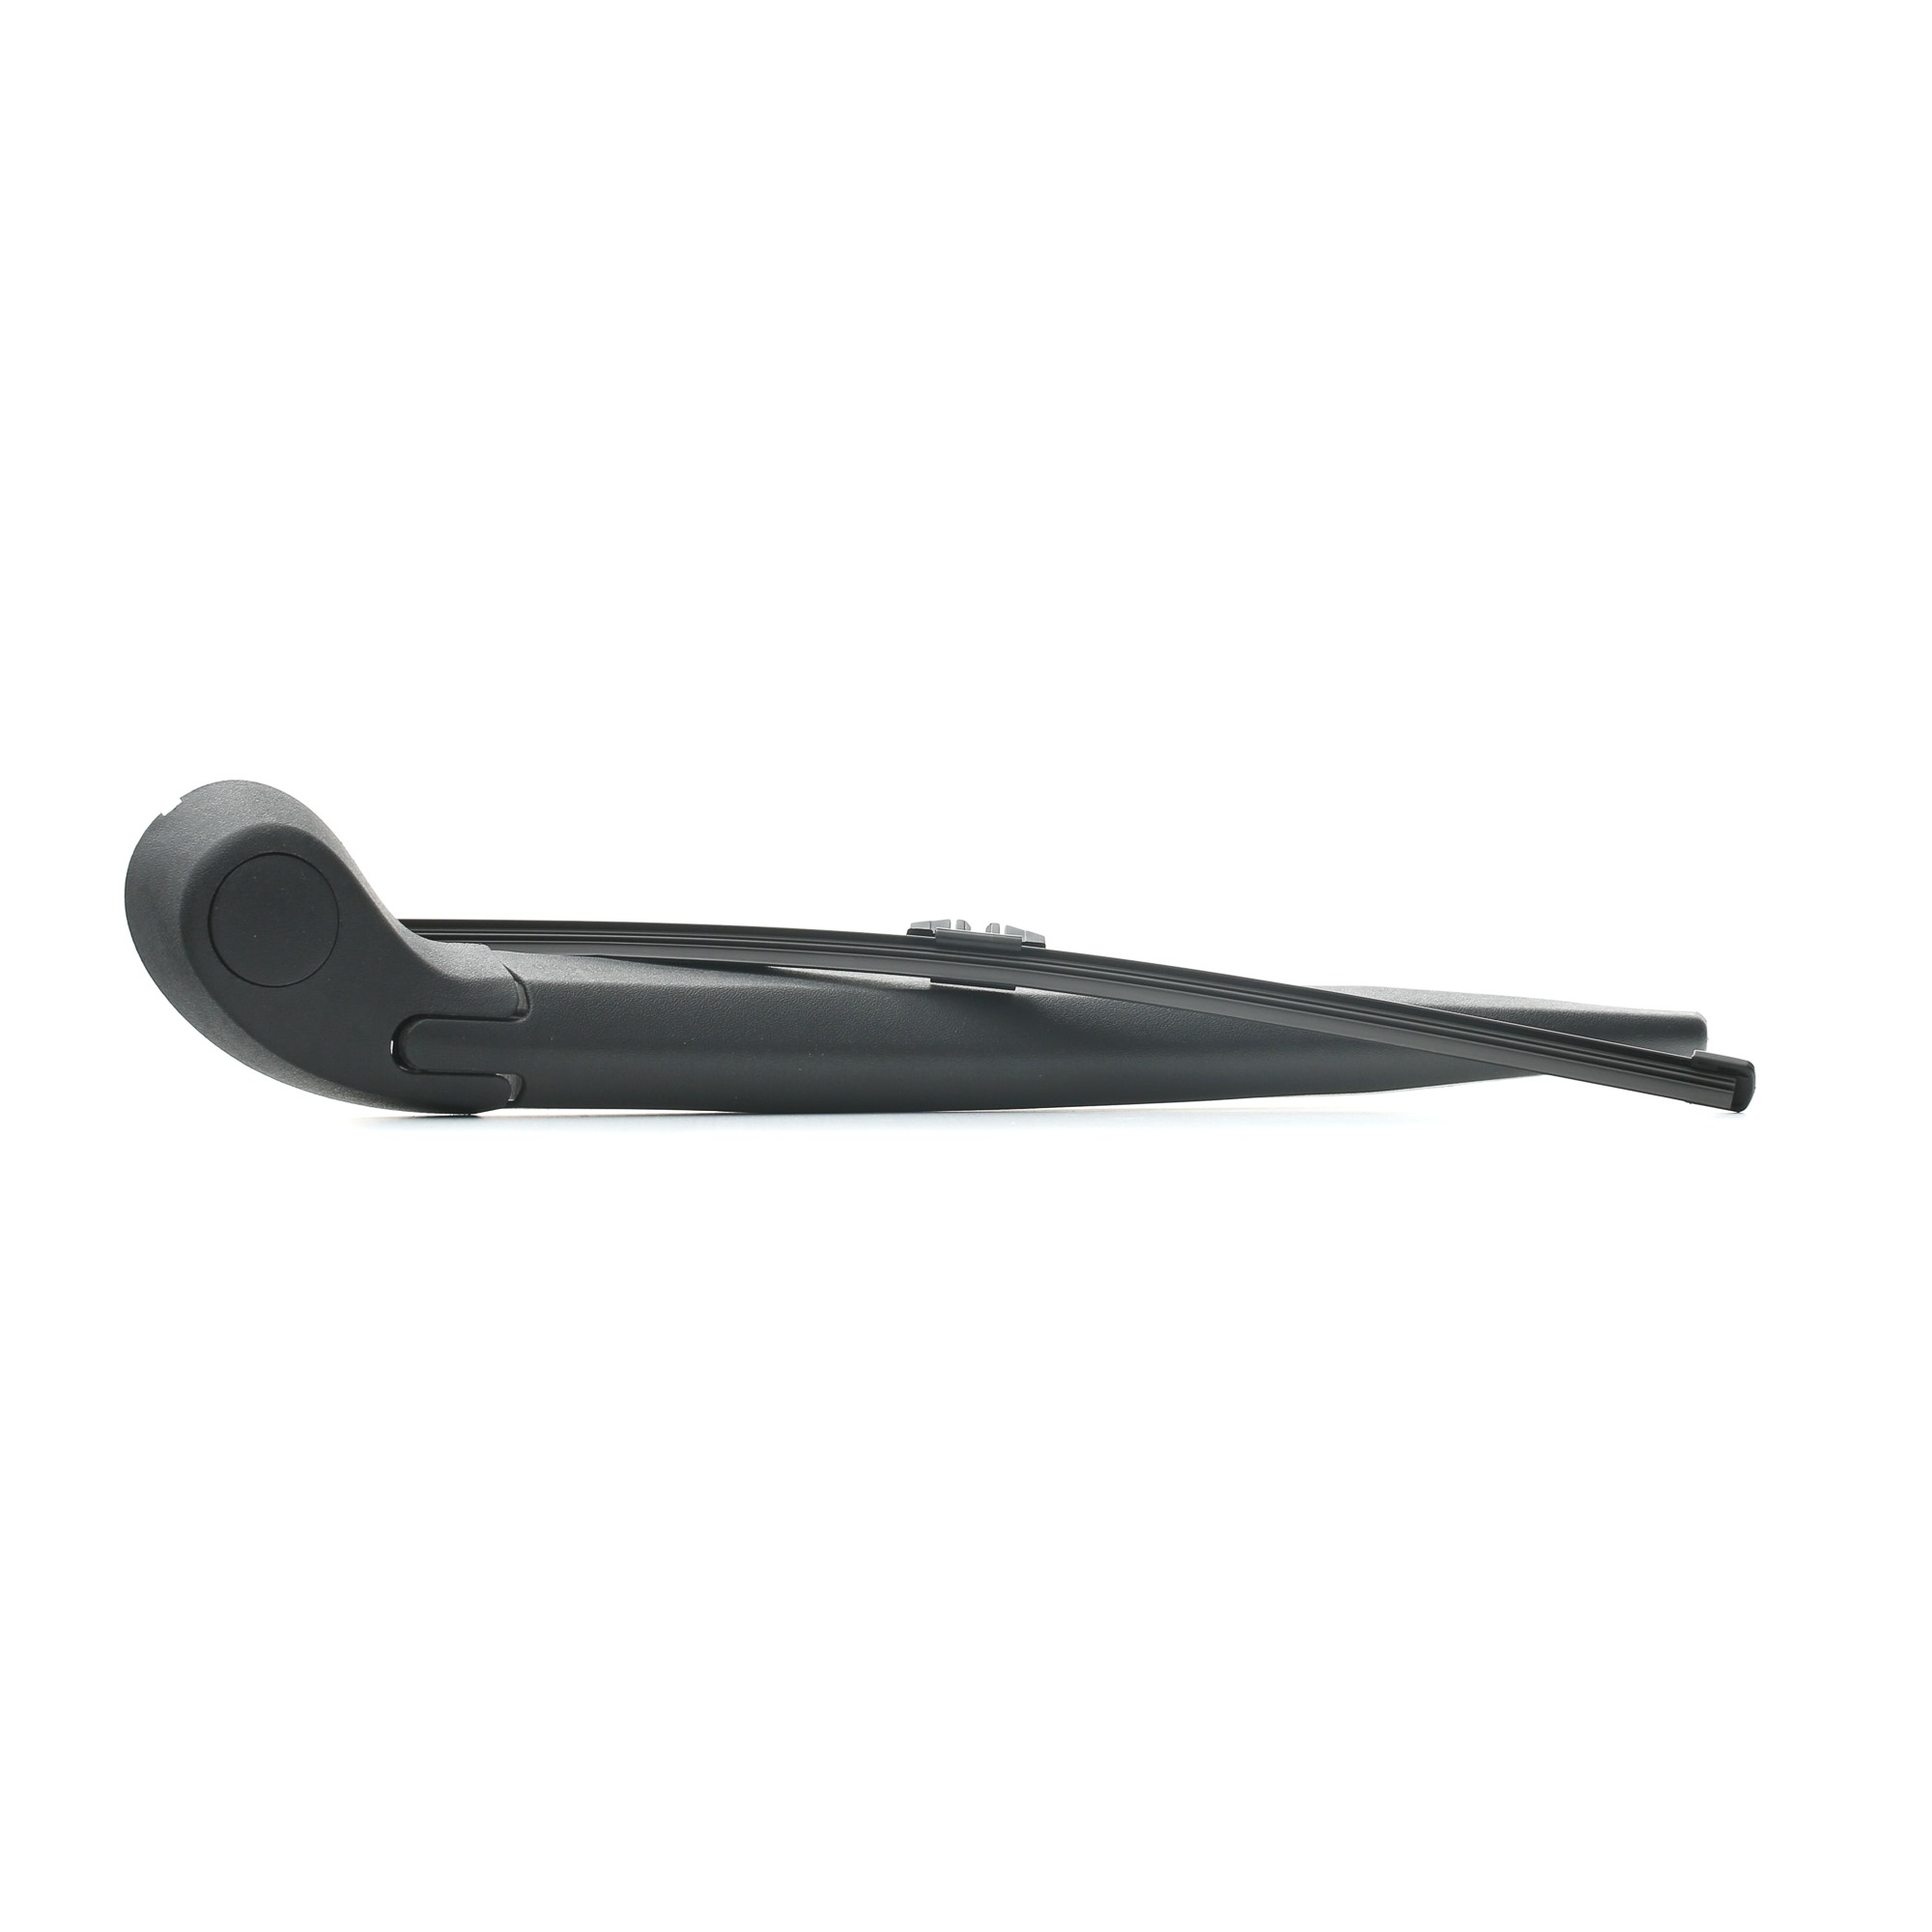 STARK SKWA-0930178 Wiper Arm, windscreen washer Rear, with cap, with integrated wiper blade